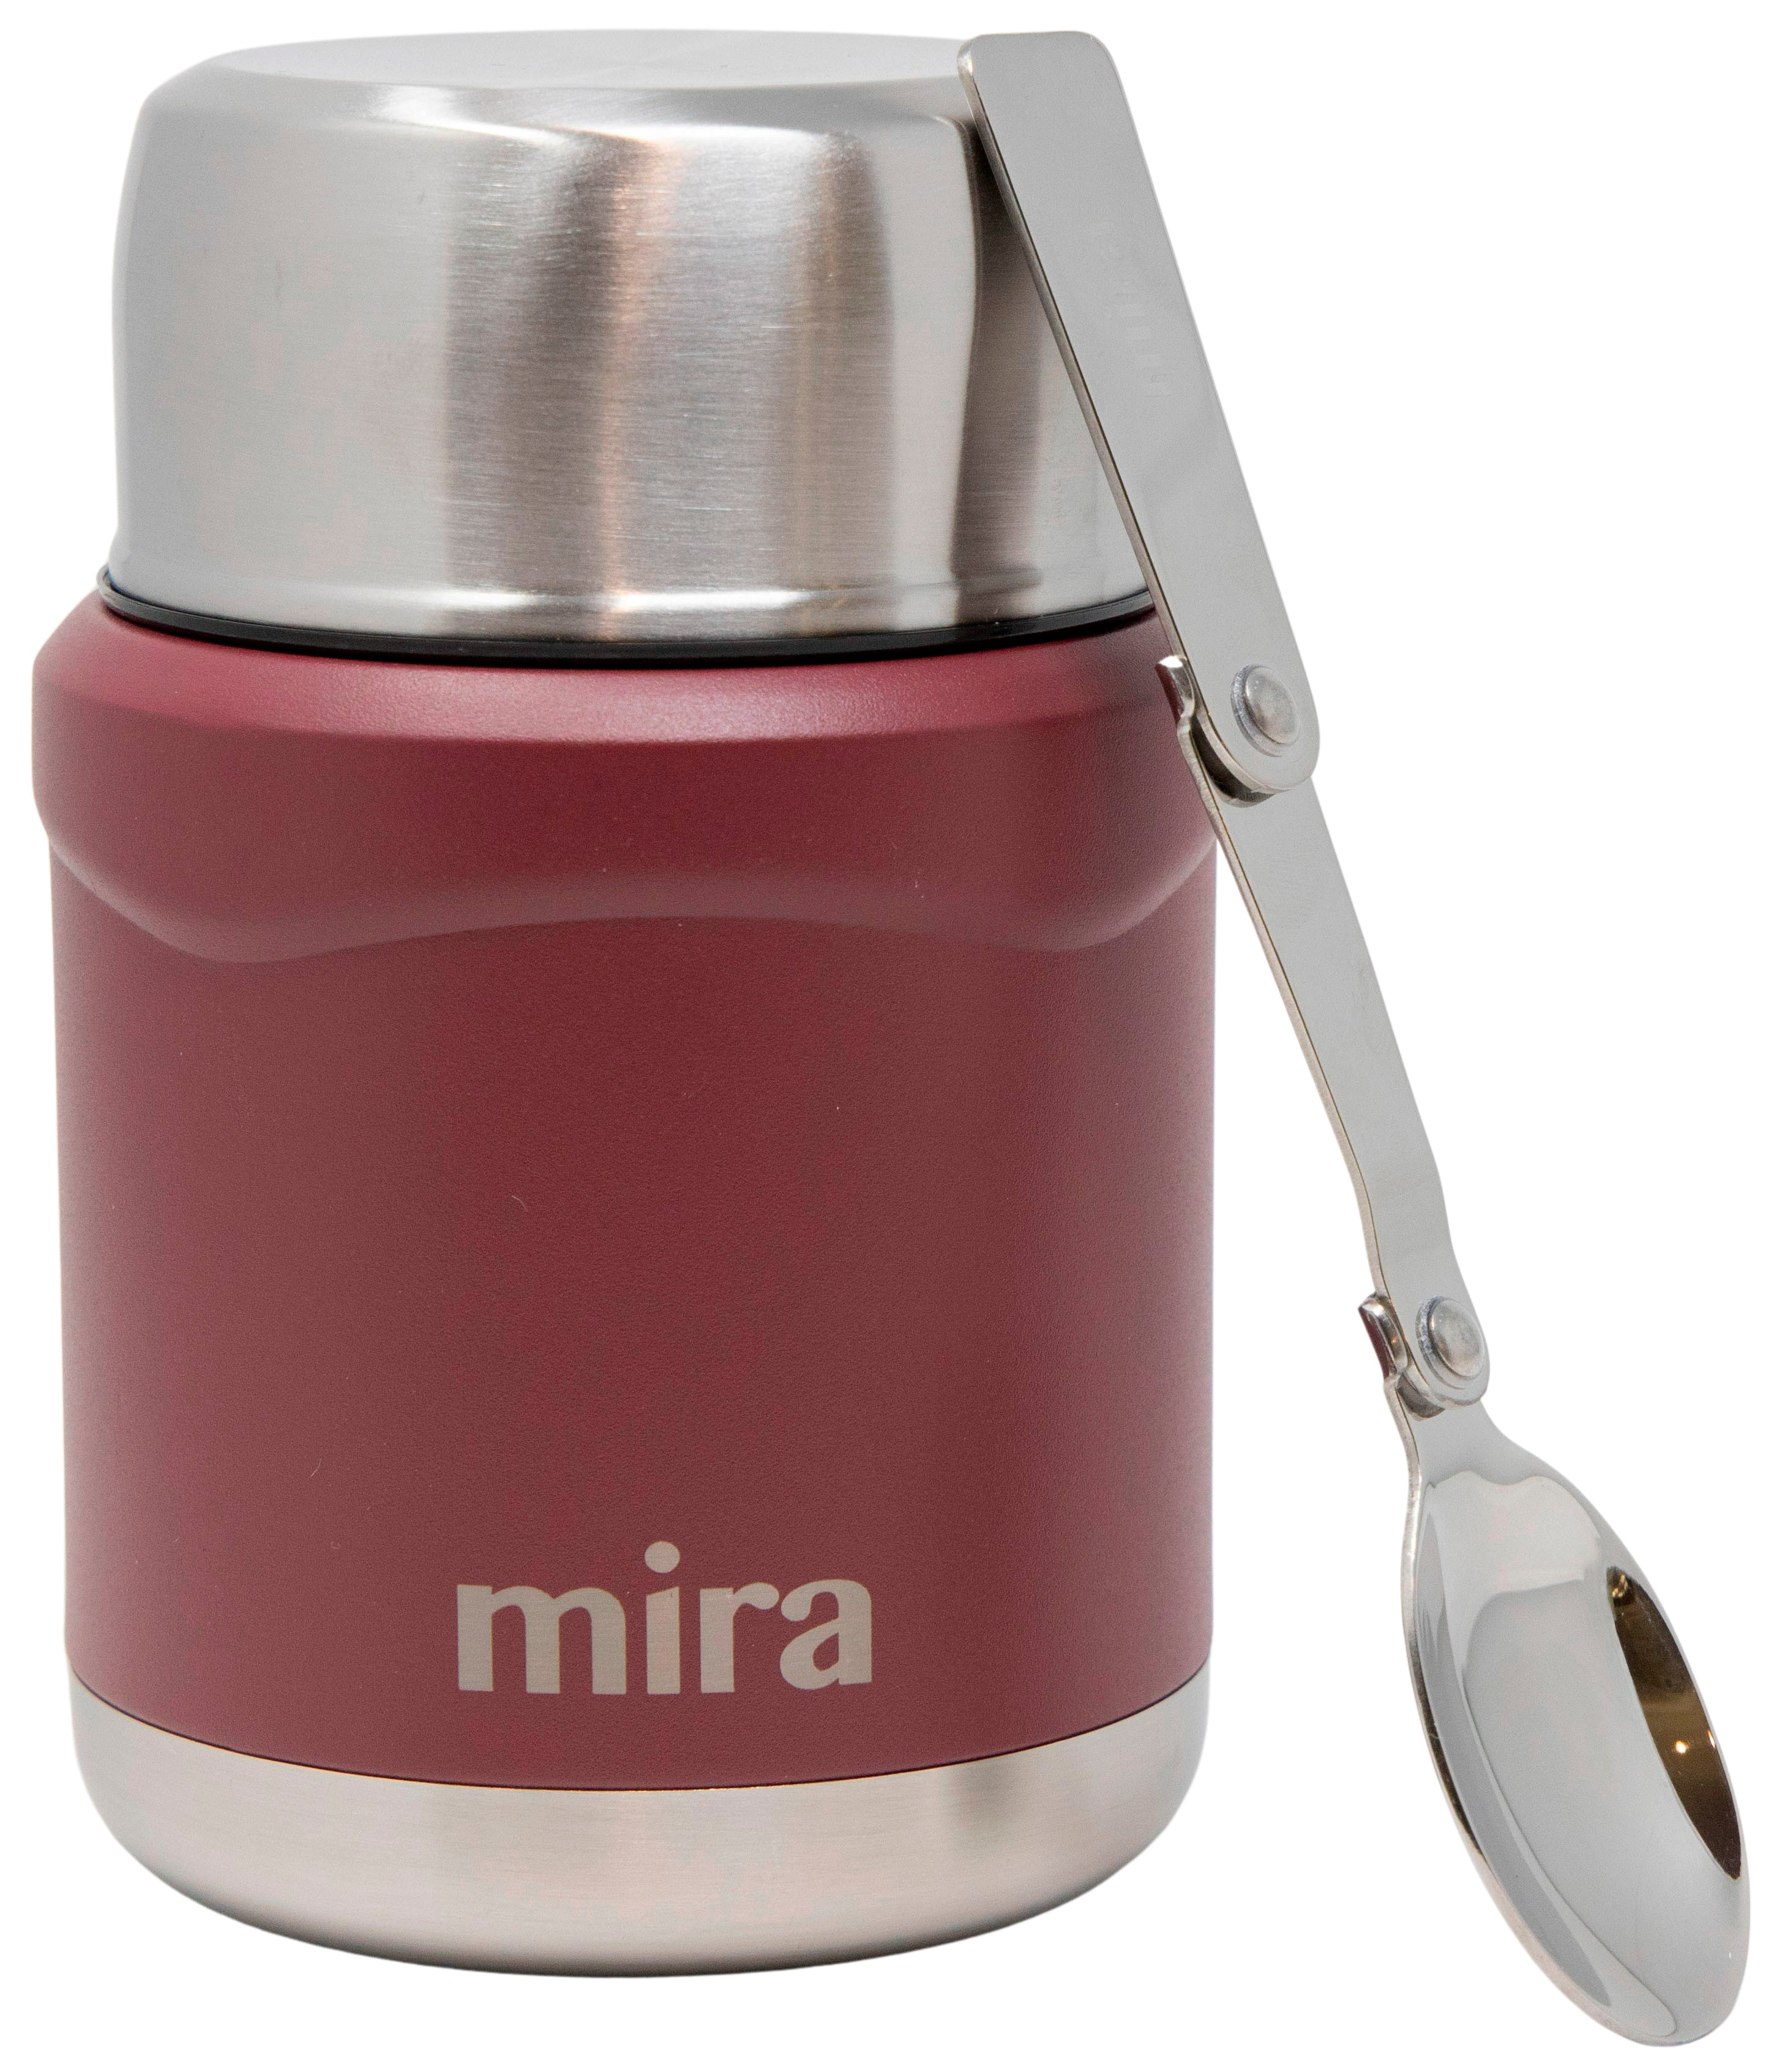 Mira Lunch, Food Jar, Vacuum Insulated Stainless Steel Lunch Thermos, 13.5 oz, Purple